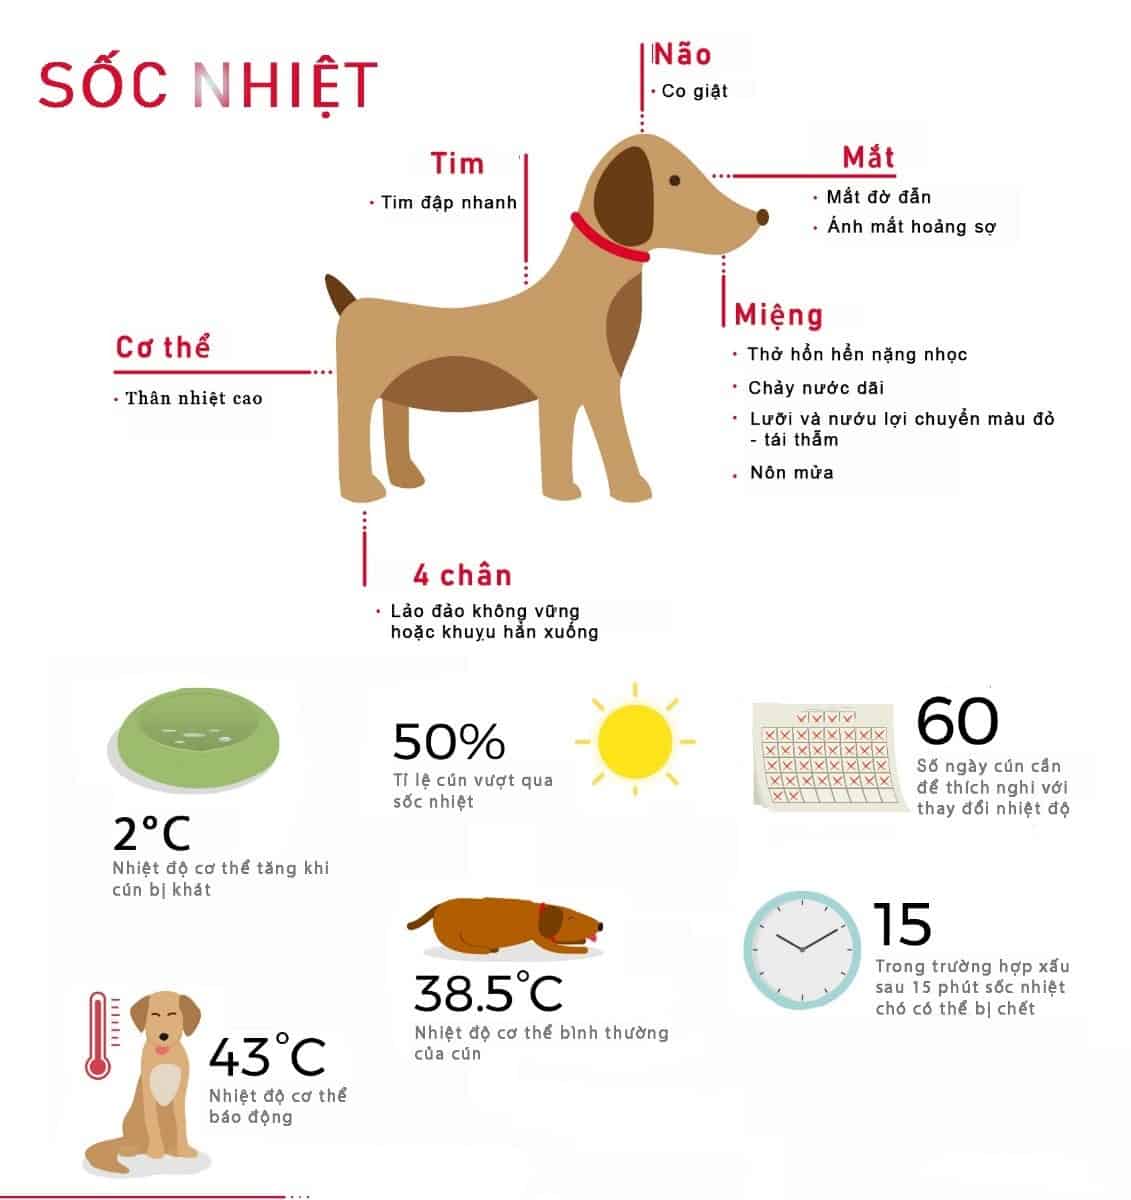 What are the symptoms and treatment for a dog experiencing heat shock and nosebleeds?